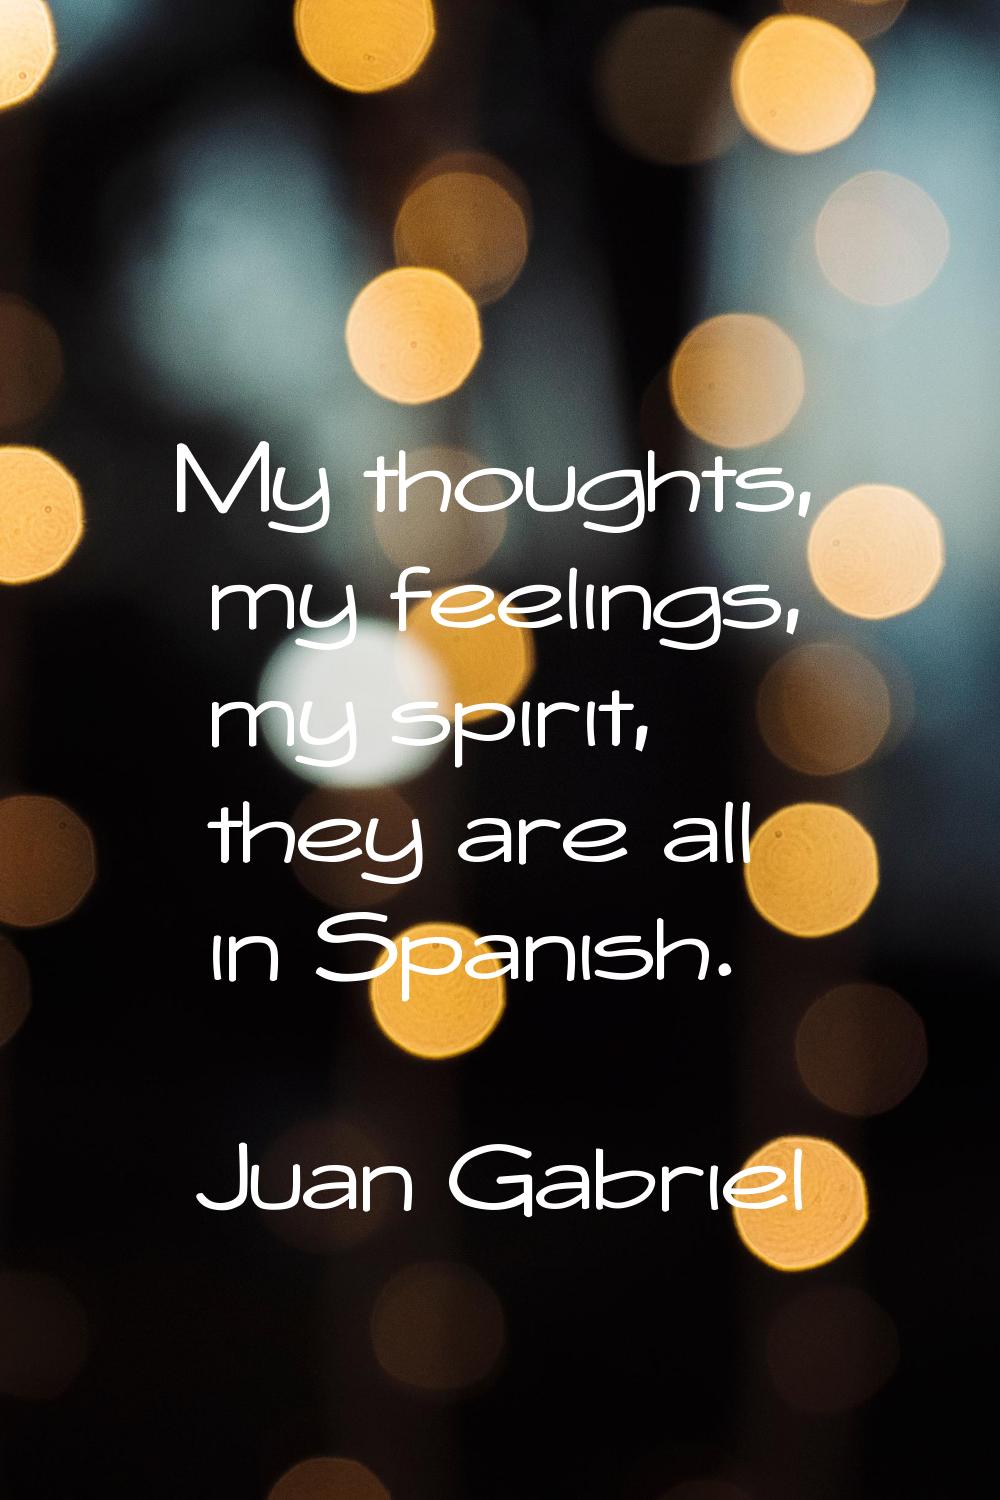 My thoughts, my feelings, my spirit, they are all in Spanish.